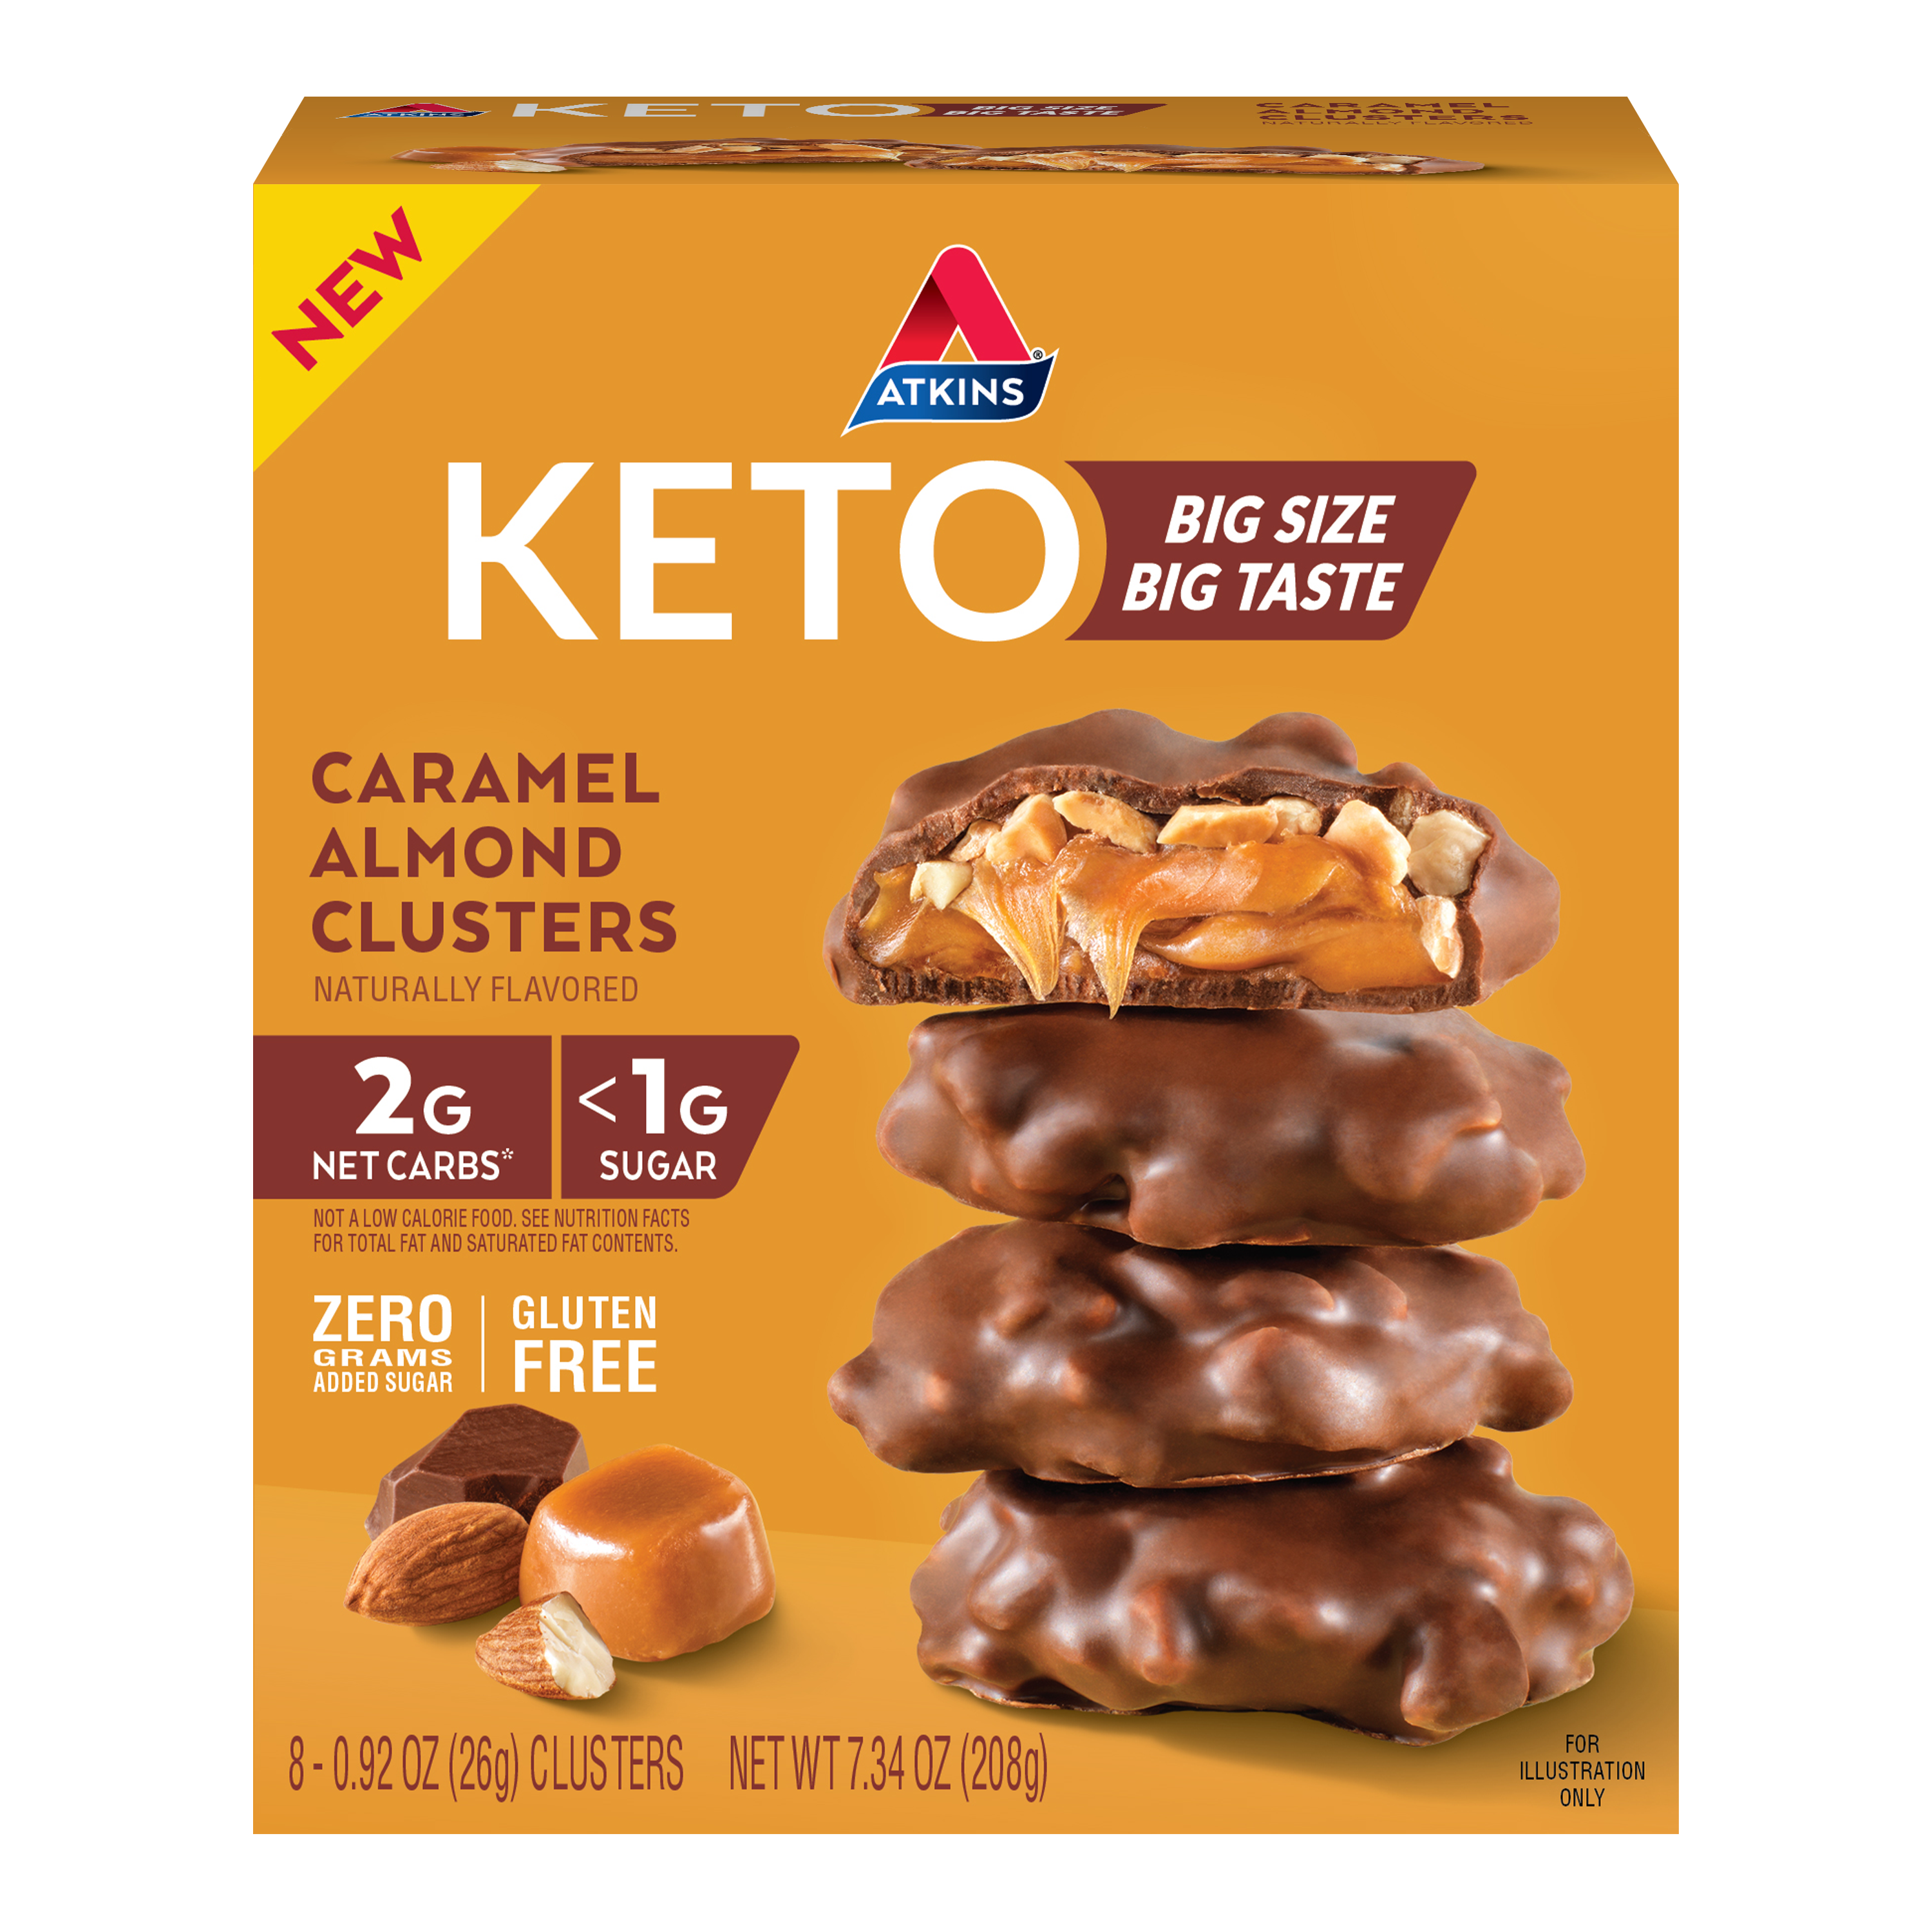 Atkins Keto Caramel Almond Clusters 8 count package